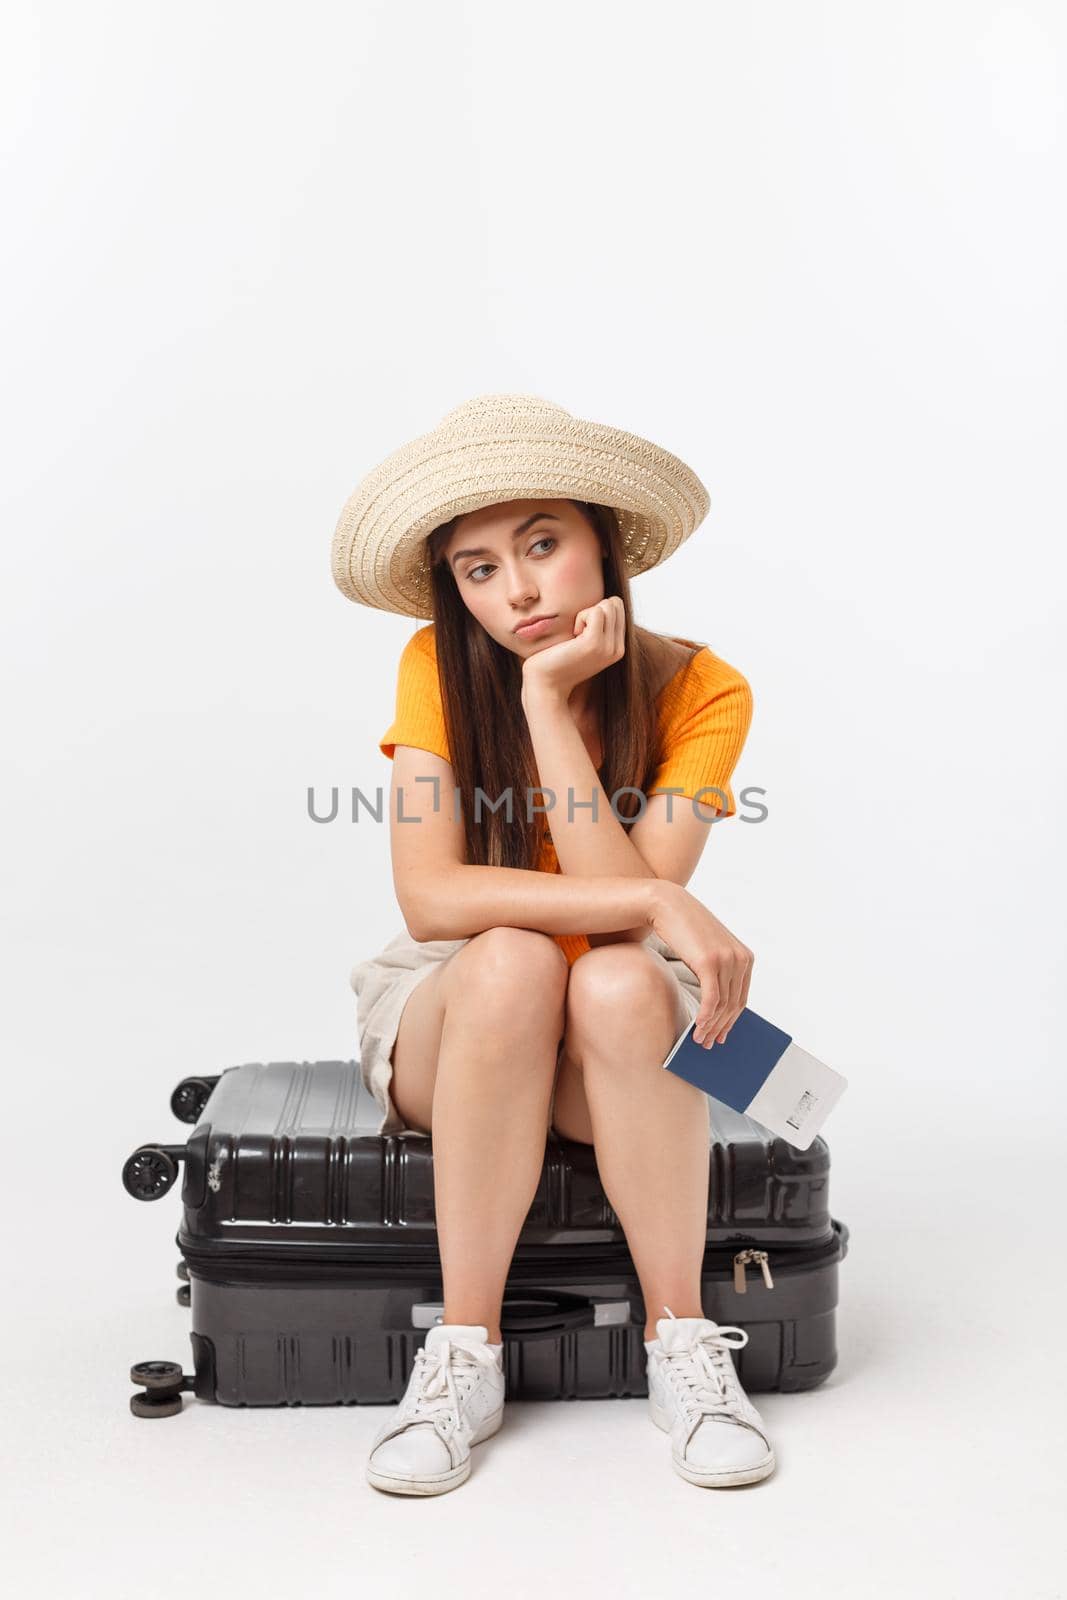 Lifestyle and travel Concept: Young beautiful caucasian woman is sitting on suitecase and waiting for her flight.Isolated over white background.